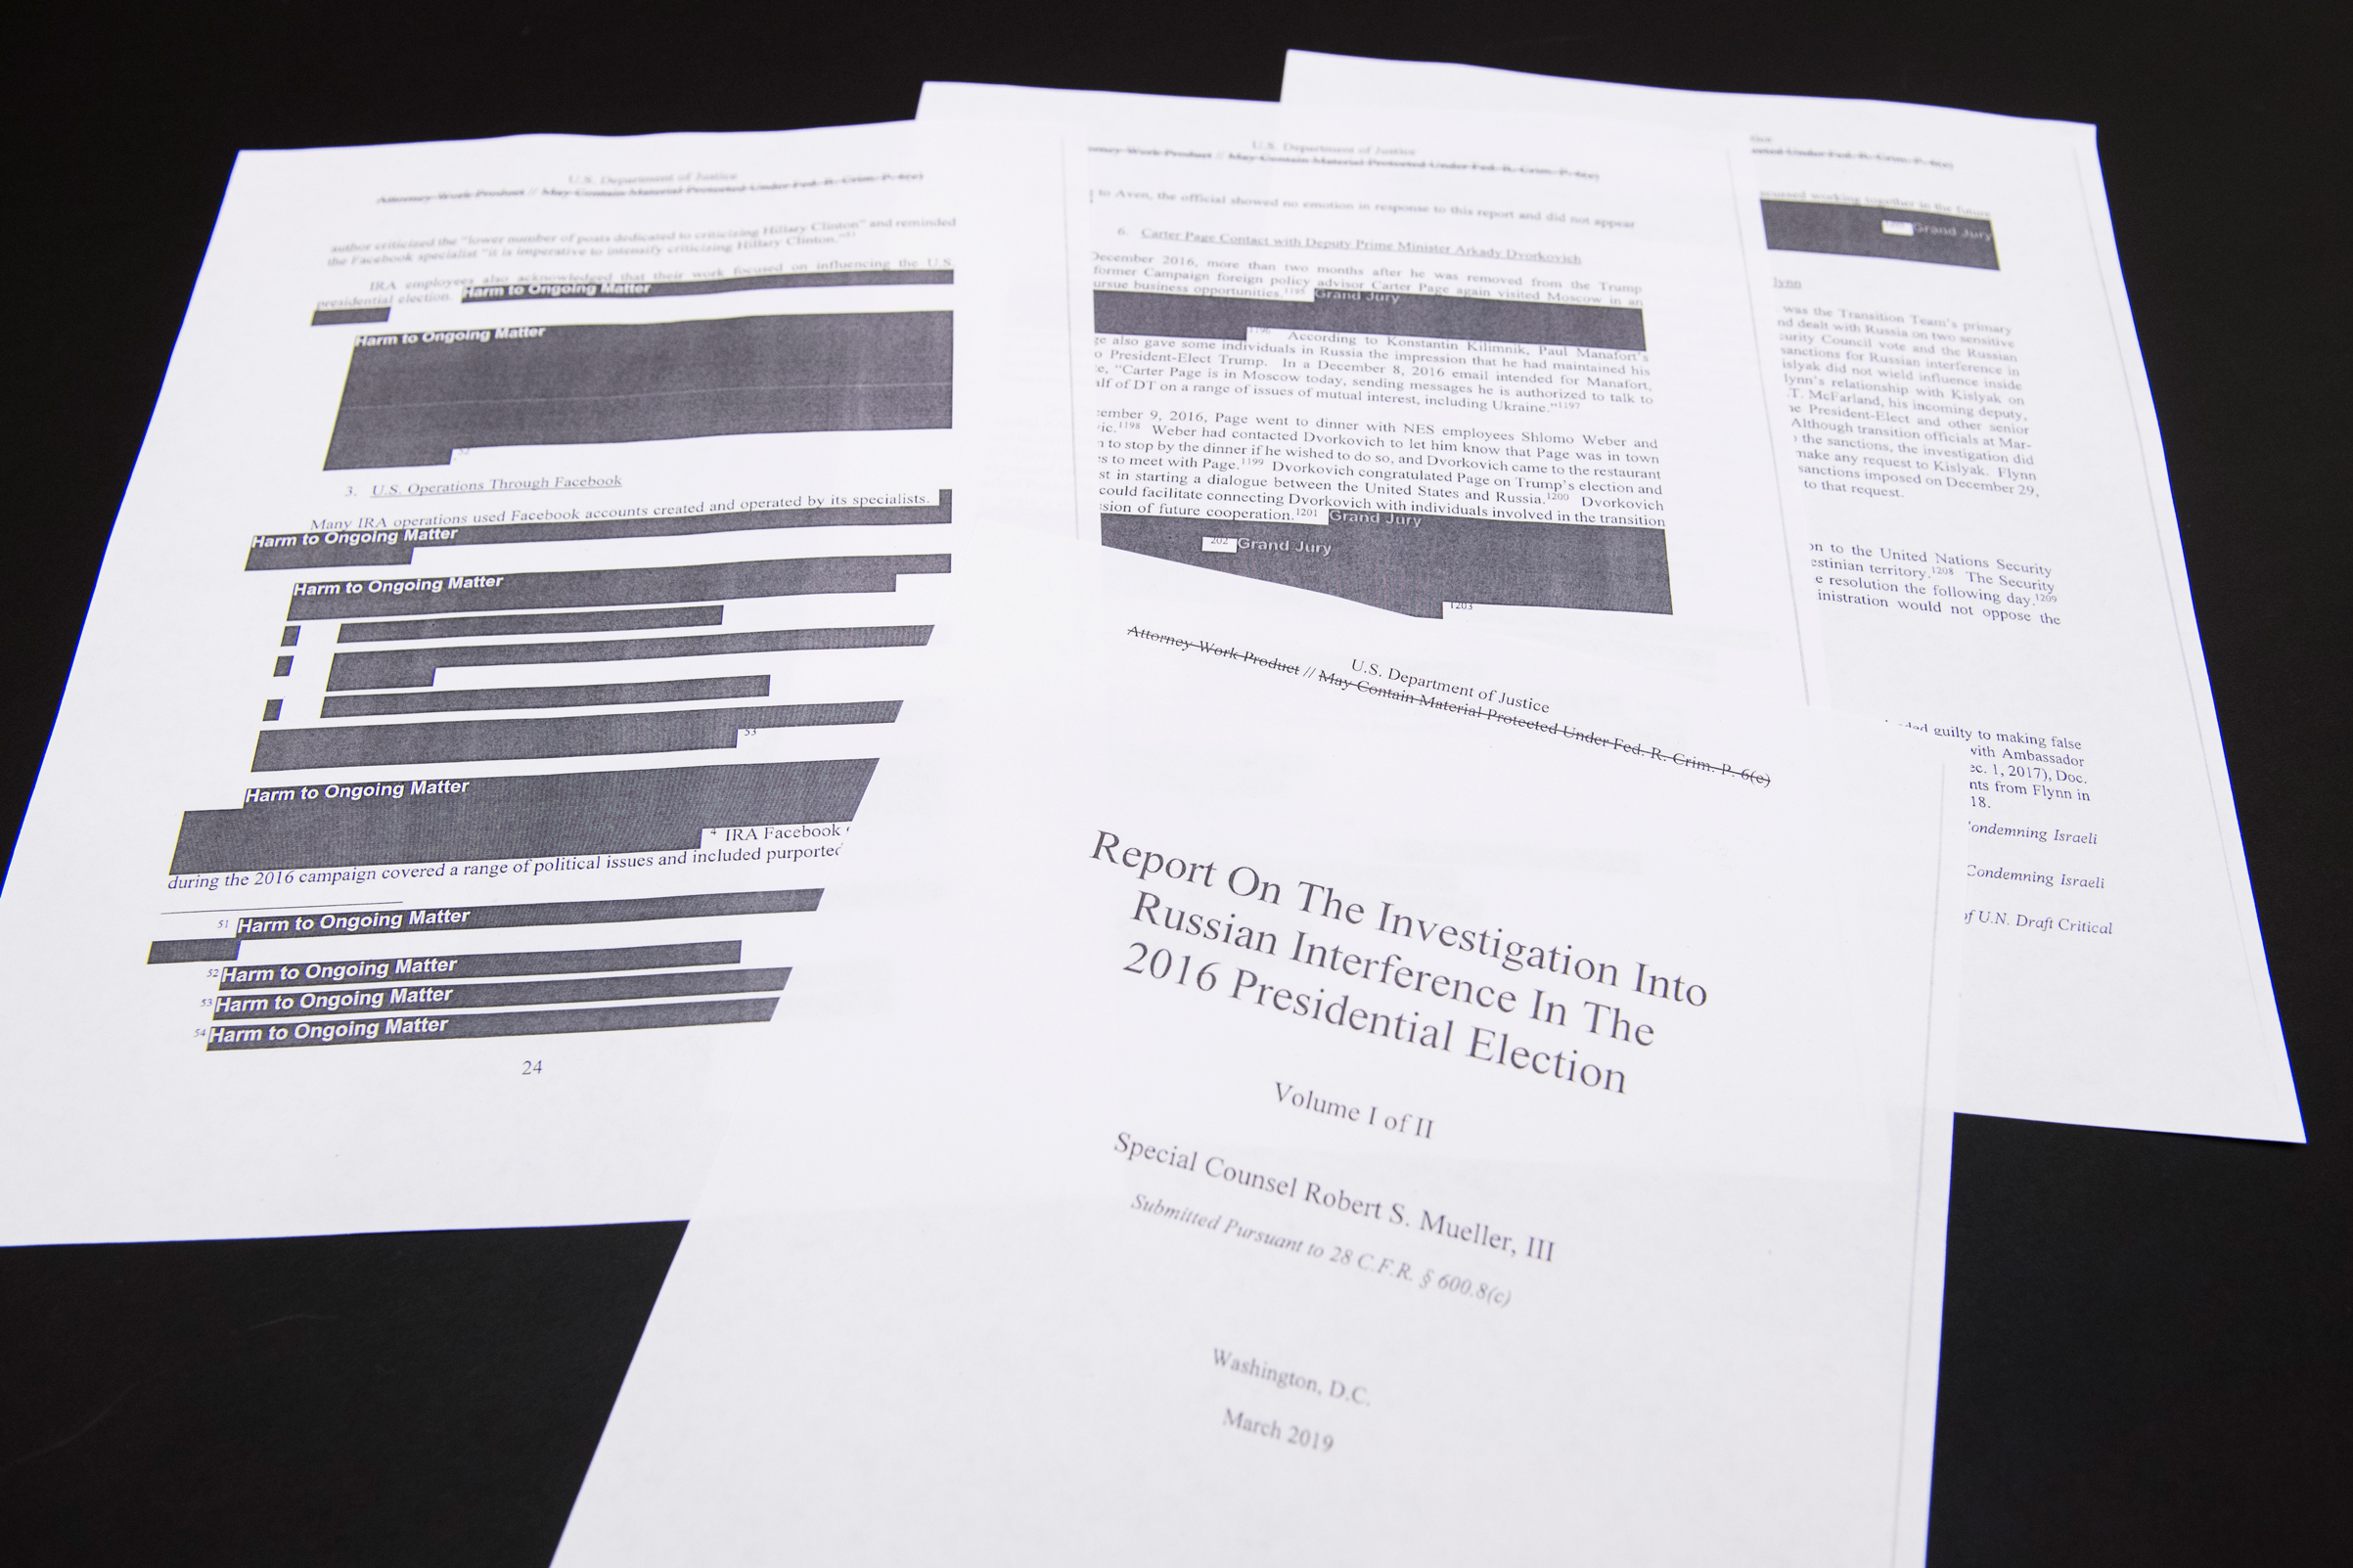 A few pages of Special Counsel Robert Mueller's report on Russian interference in the 2016 election that were printed out by staff in the House Judiciary Committee's hearing room on April 18, 2019. (Tom Williams—CQ Roll Call/Getty Images)